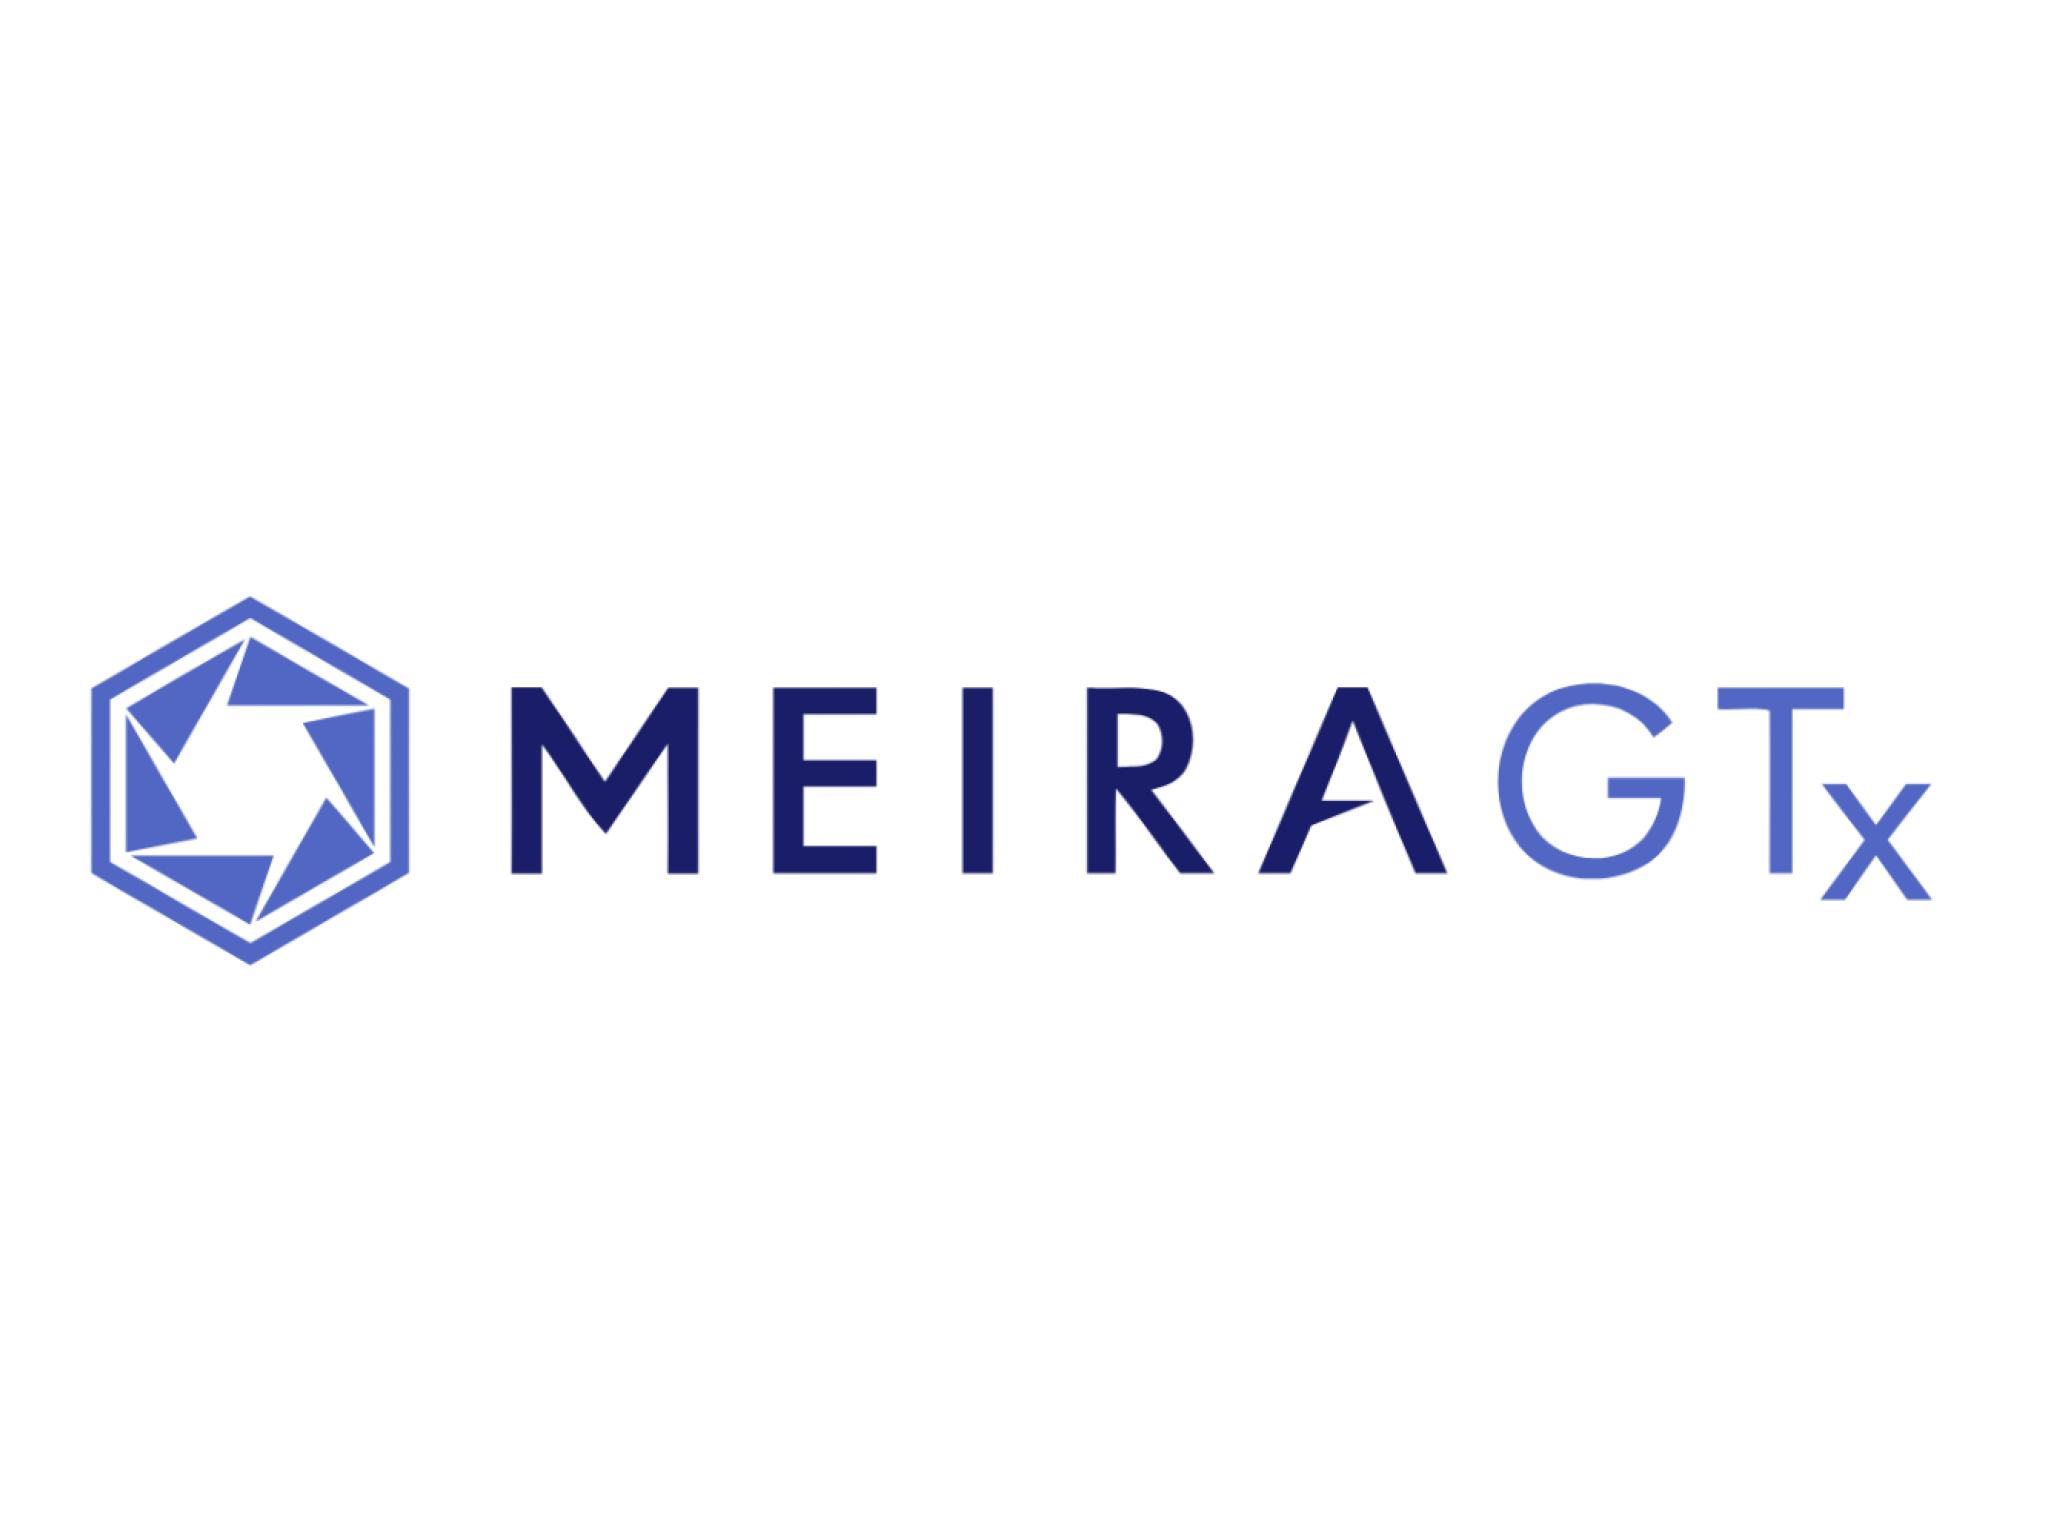  why-is-eye-disease-related-gene-therapy-focused-meiragtx-stock-soaring-today 